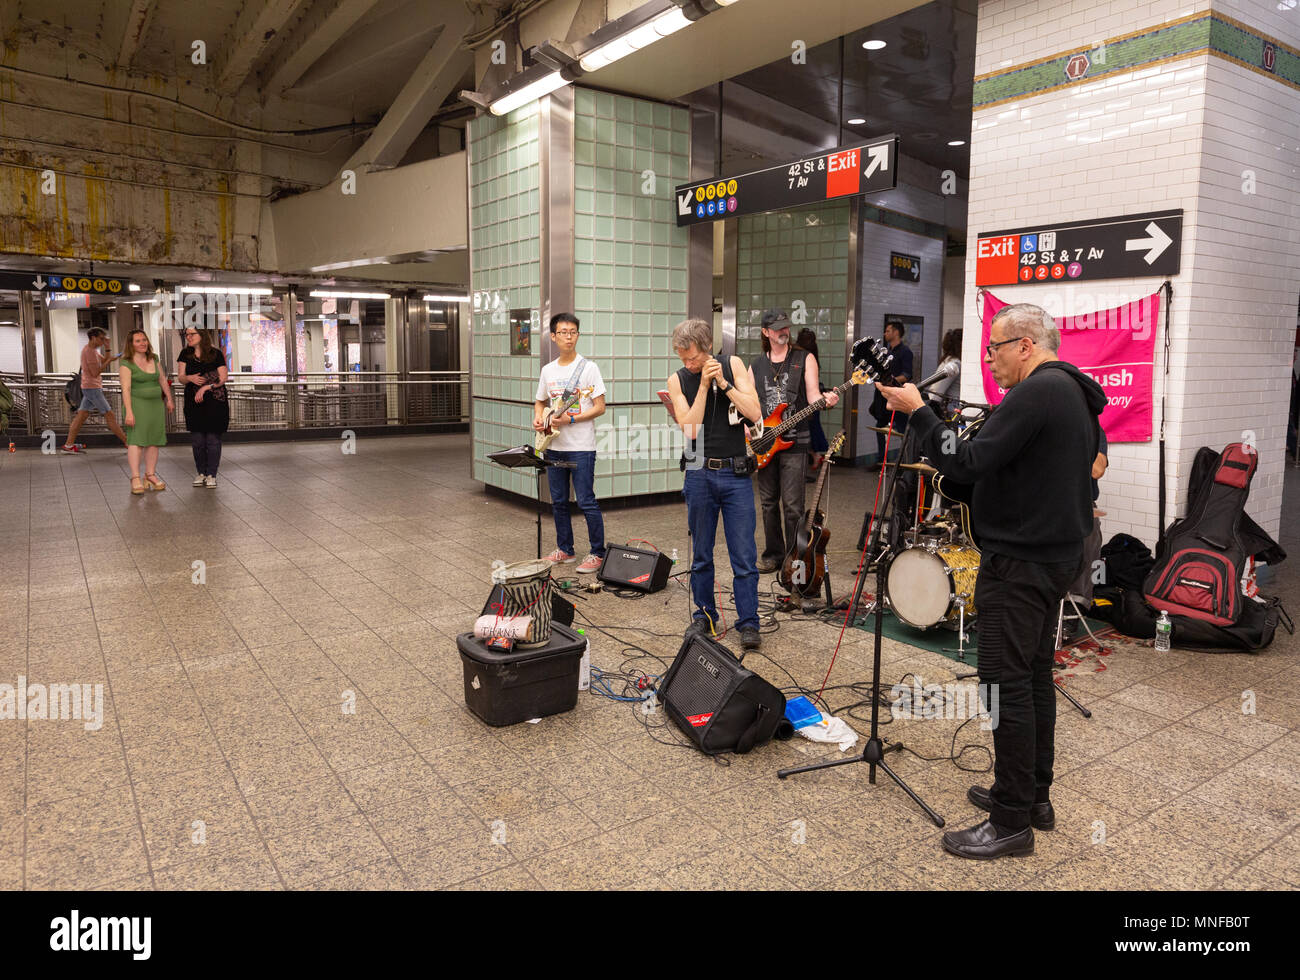 Buskers busking on the New York subway, Times Square and 42 St subway station, New york city subway, USA Stock Photo